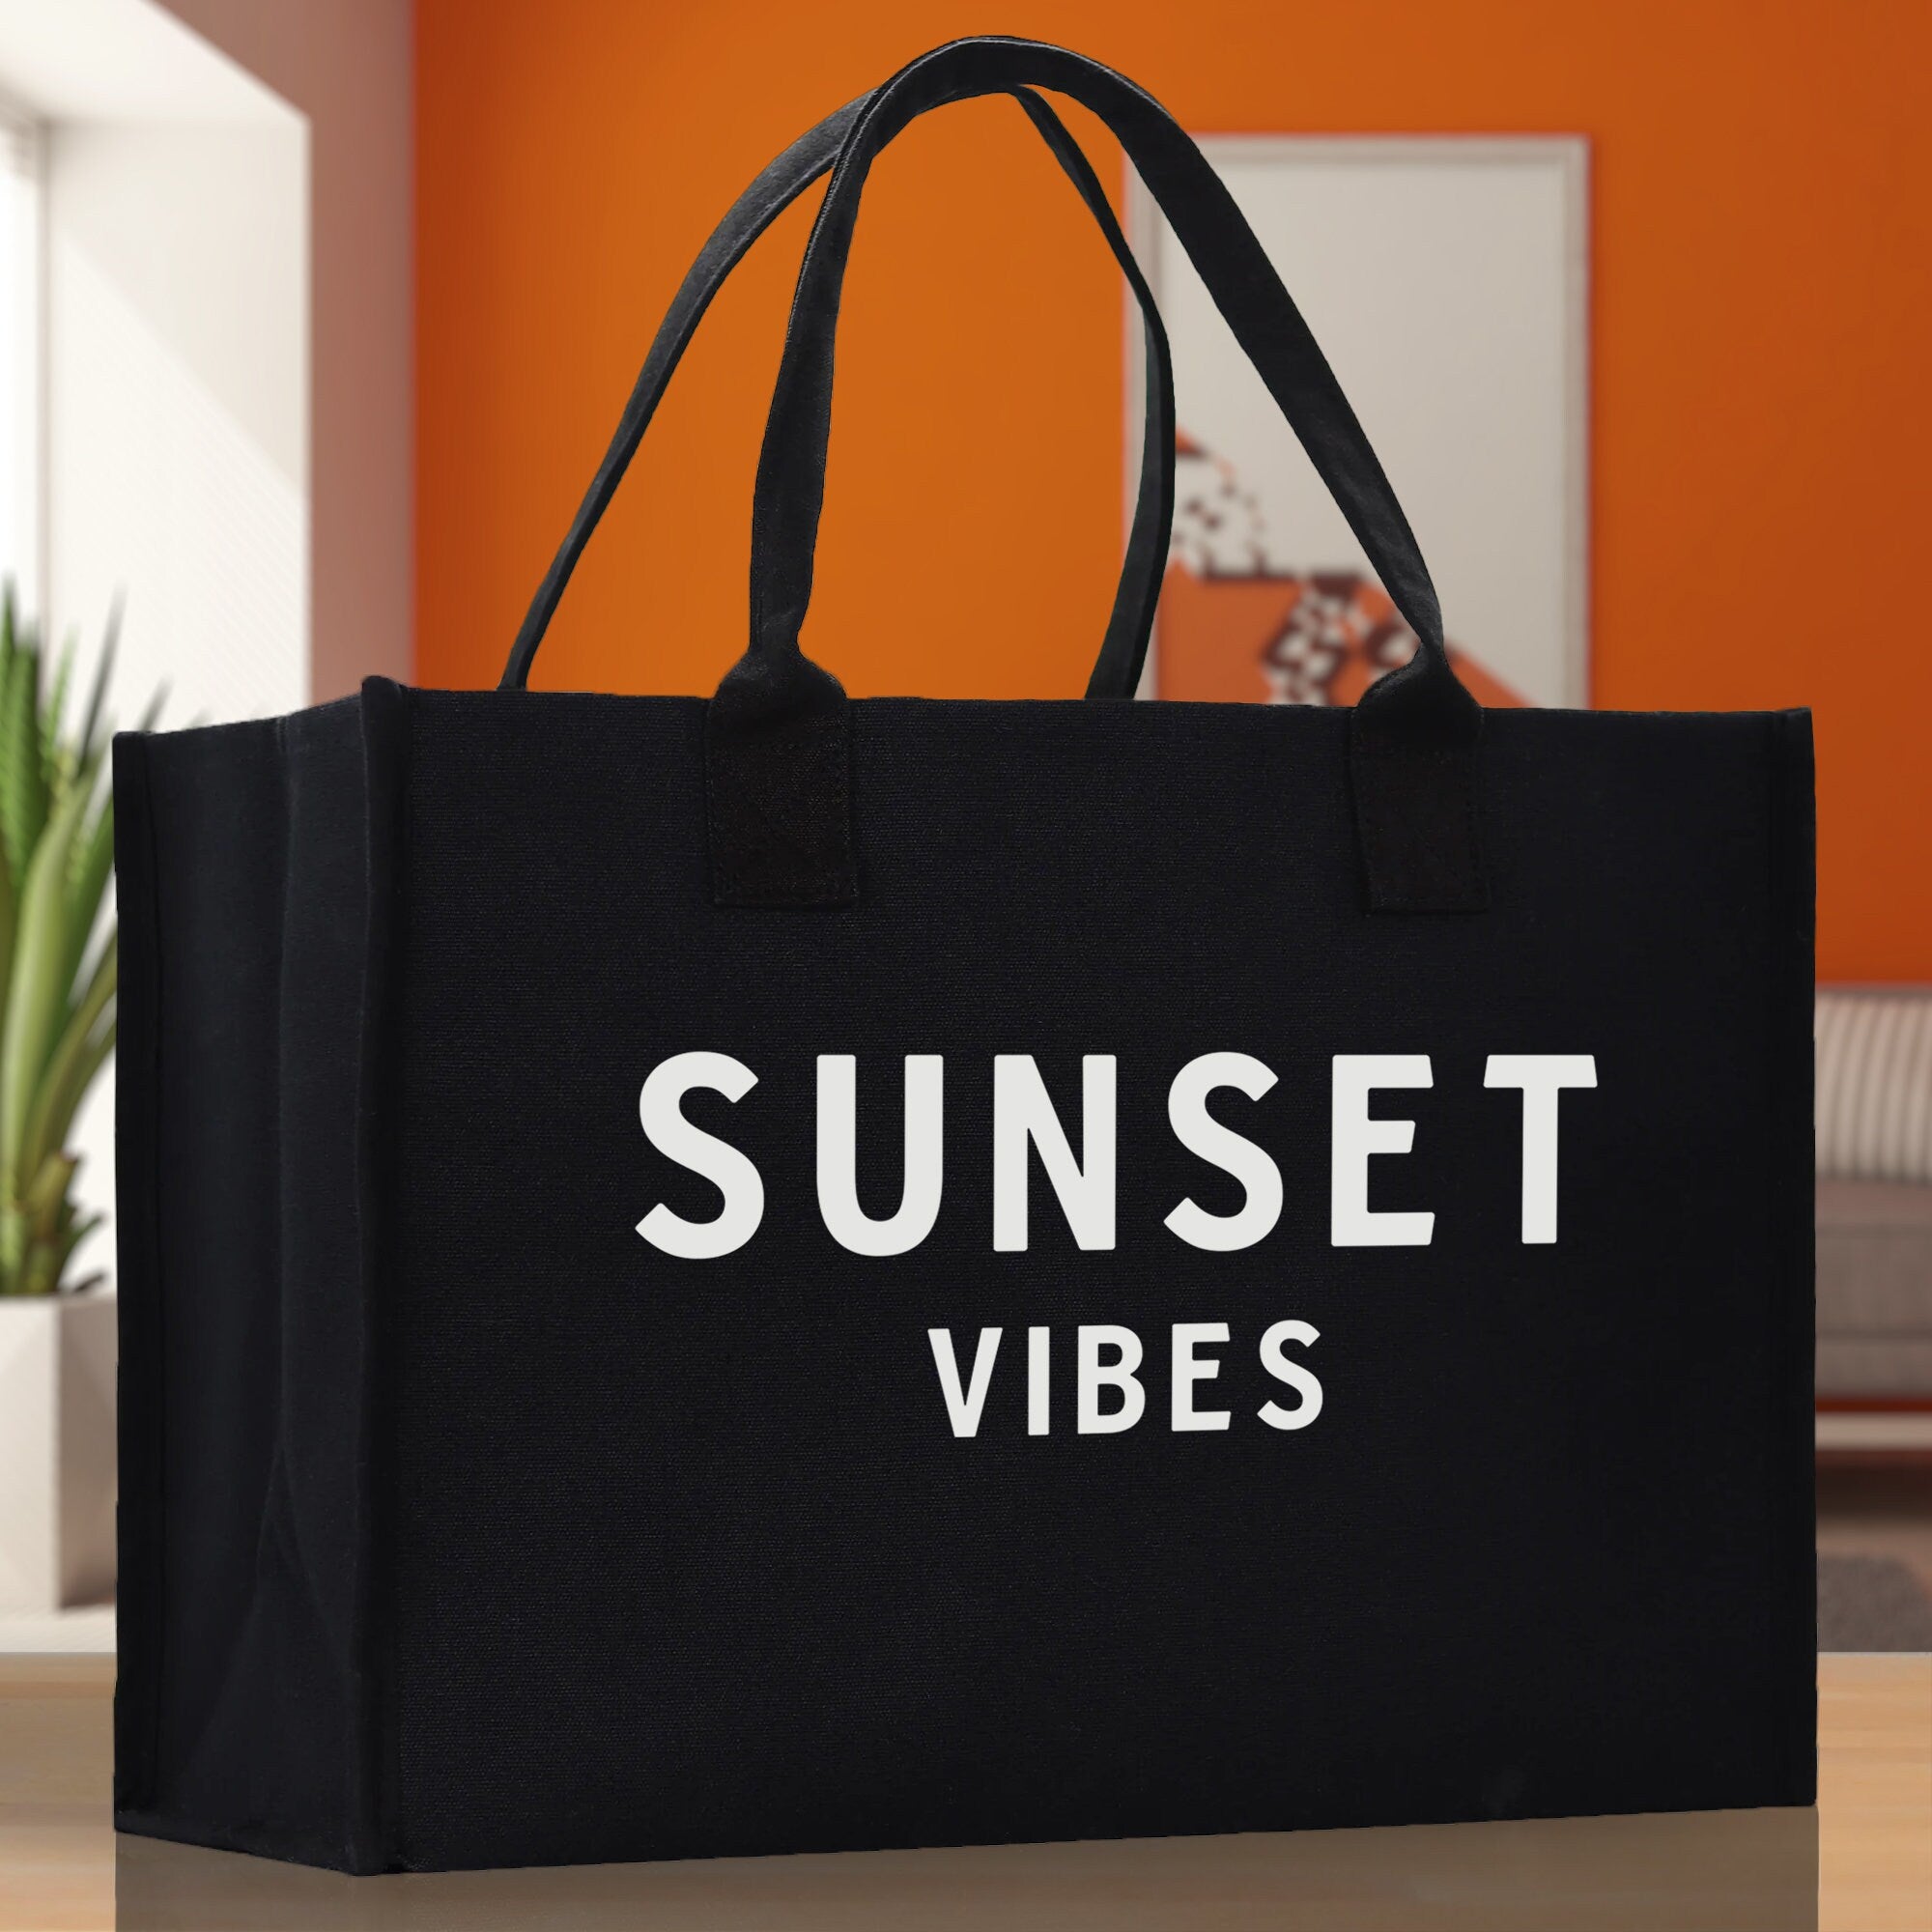 Sunset Vibes Cotton Canvas Chic Beach Tote Bag Multipurpose Tote Weekender Tote Gift for Her Outdoor Tote Vacation Tote Large Beach Bag